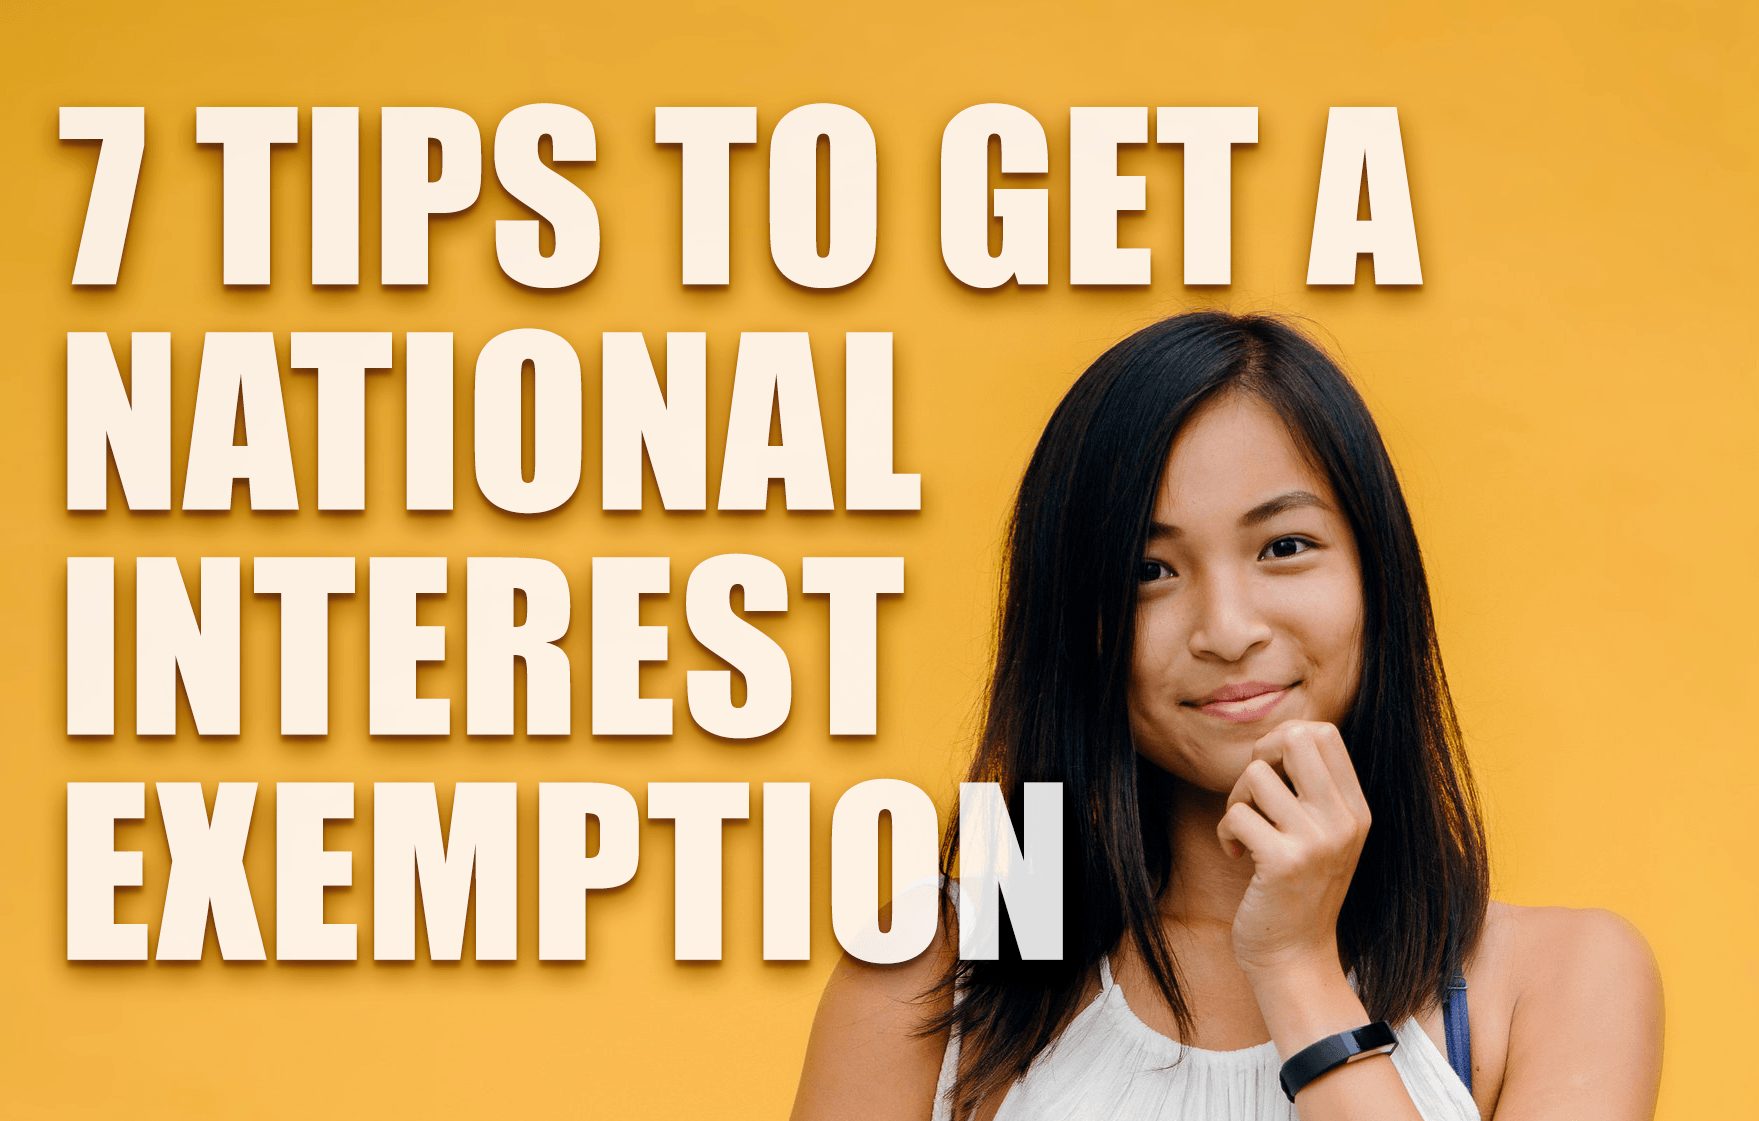 7-tips-to-get-a-national-interest-exemption